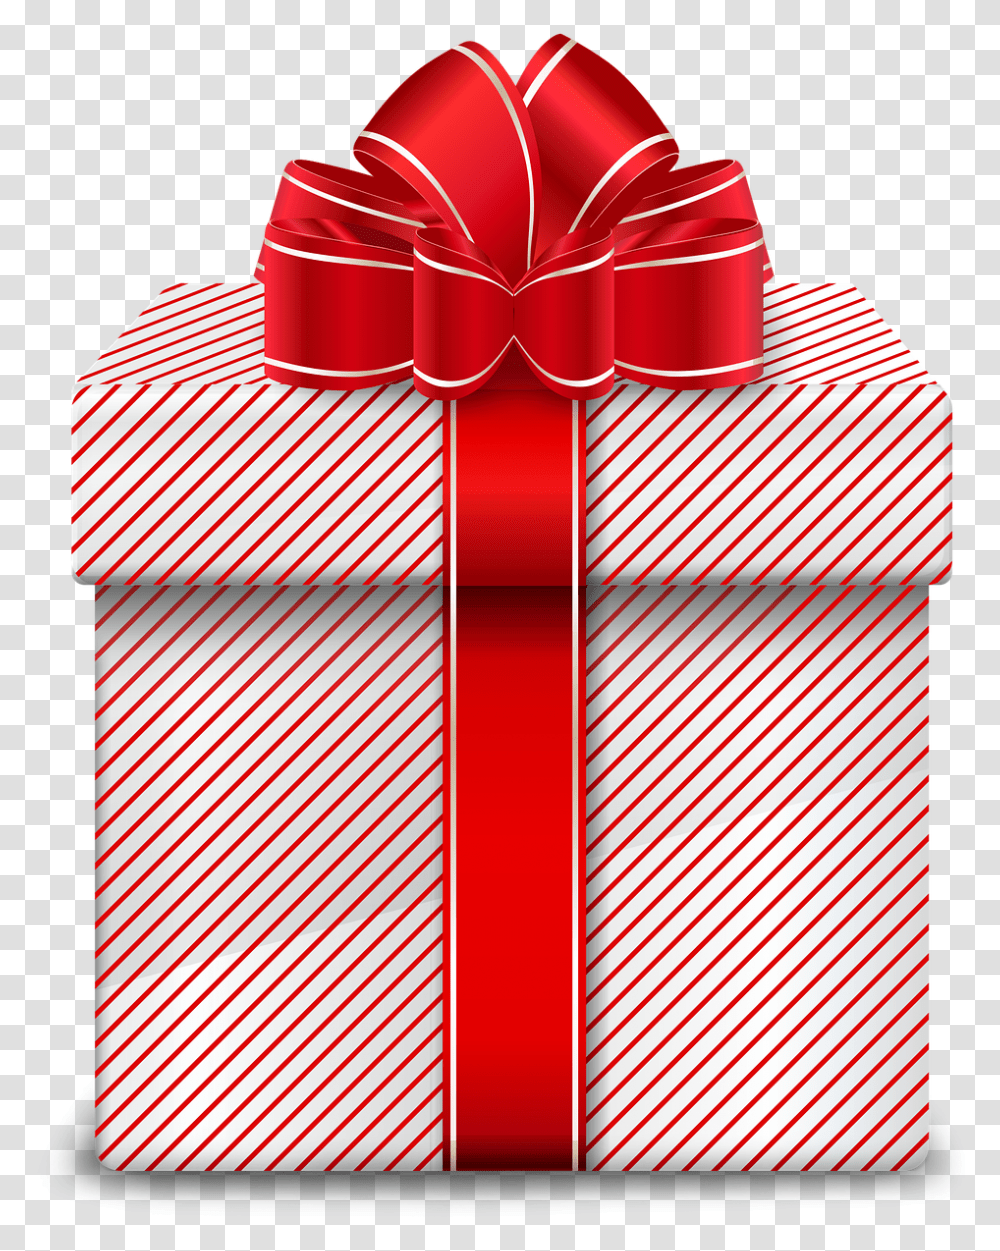 Gift Red Gift White And Red Christmas Gift Episode Interactive Present Overlays, Dynamite, Bomb, Weapon, Weaponry Transparent Png